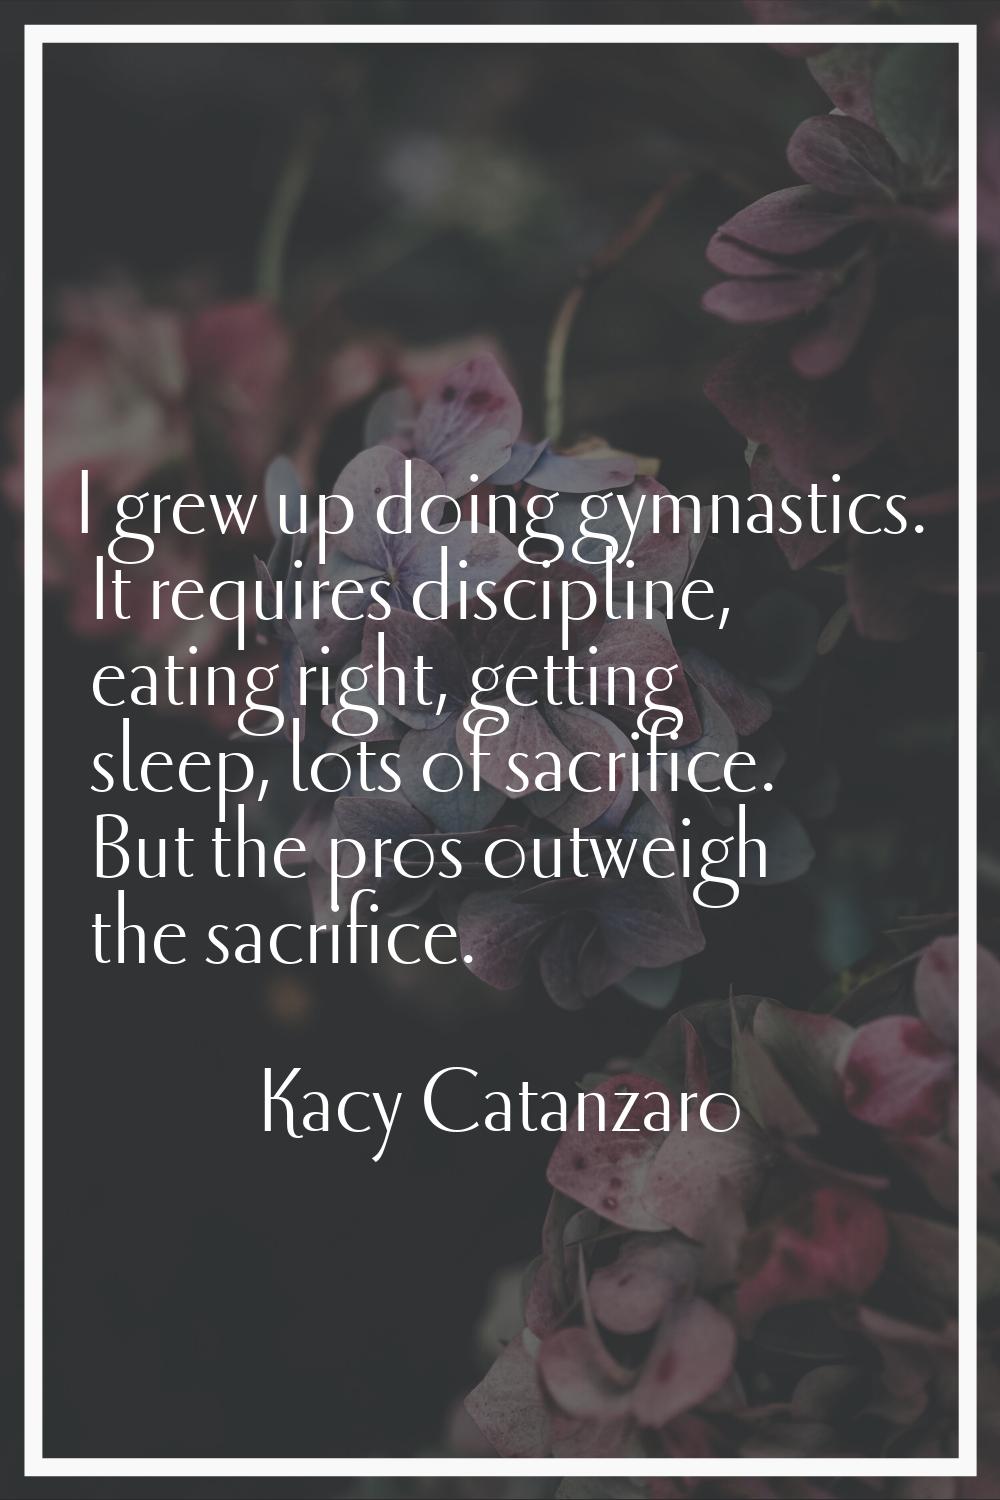 I grew up doing gymnastics. It requires discipline, eating right, getting sleep, lots of sacrifice.